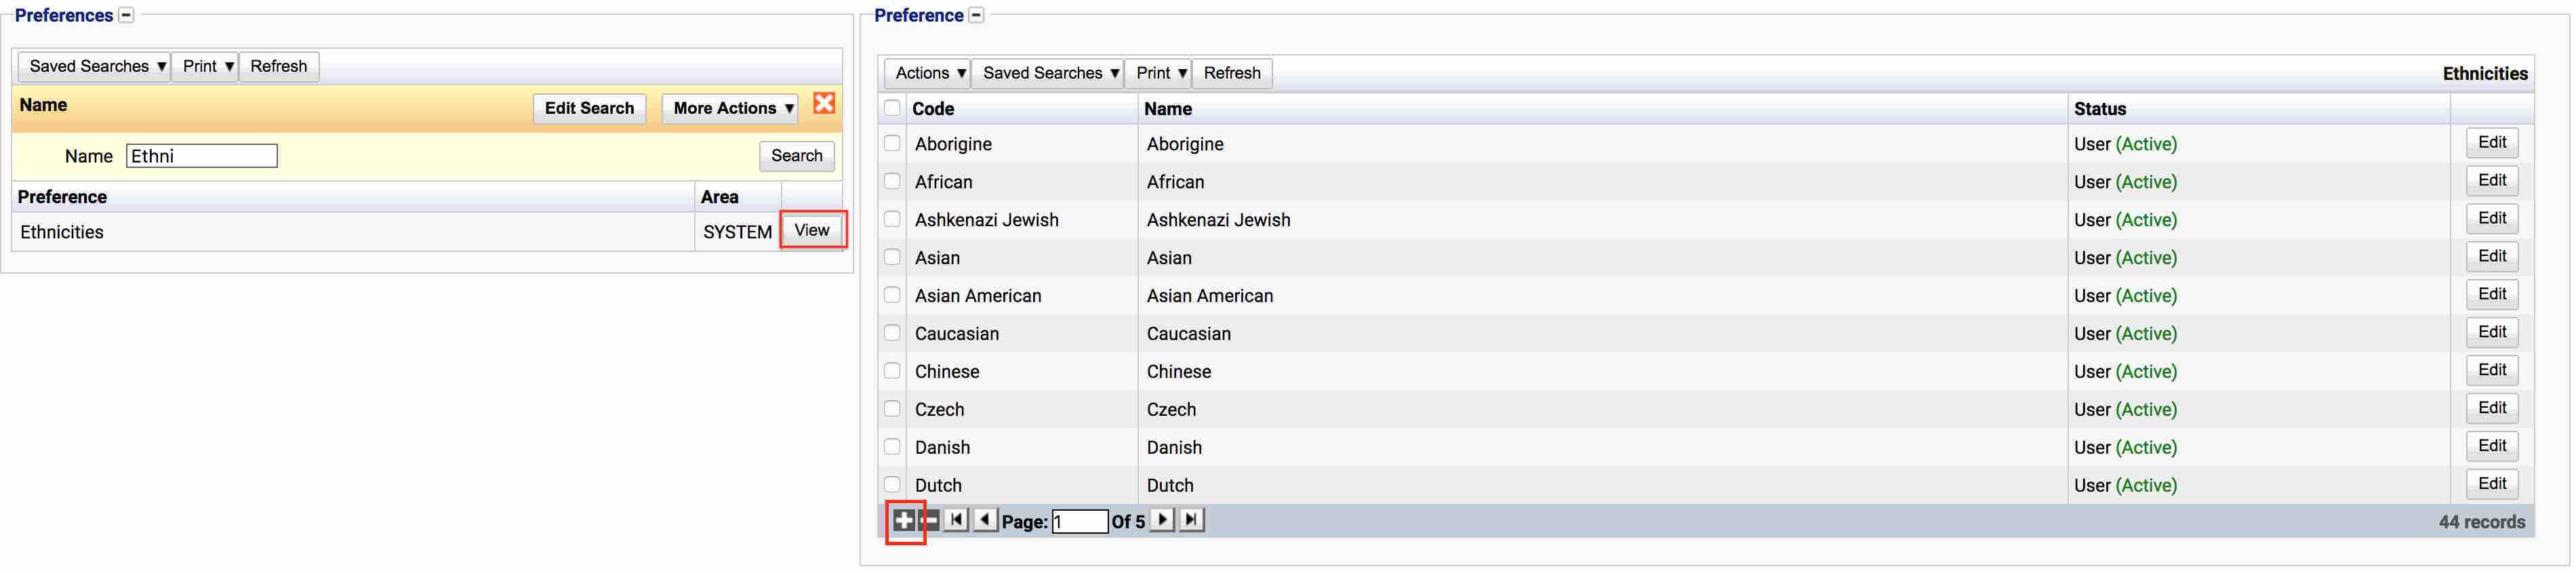 Finding Ethnicities in Preference List